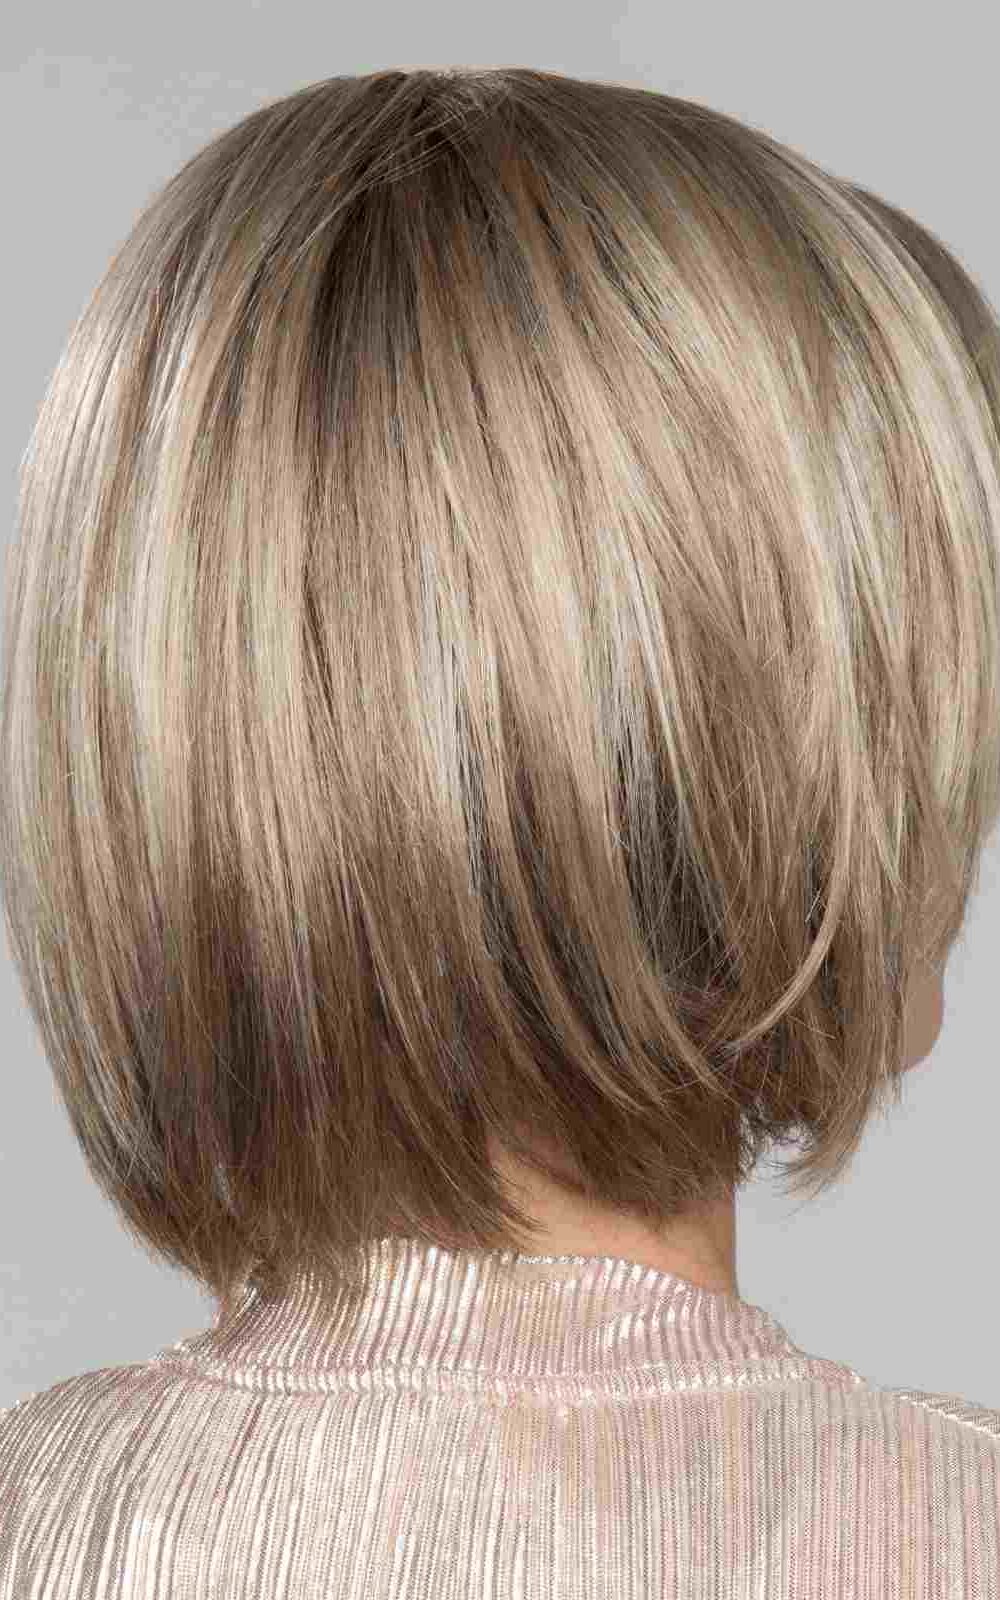  This wig has been made using the finest grade materials and features cutting edge wig technology to create stunning looks to see and feel.